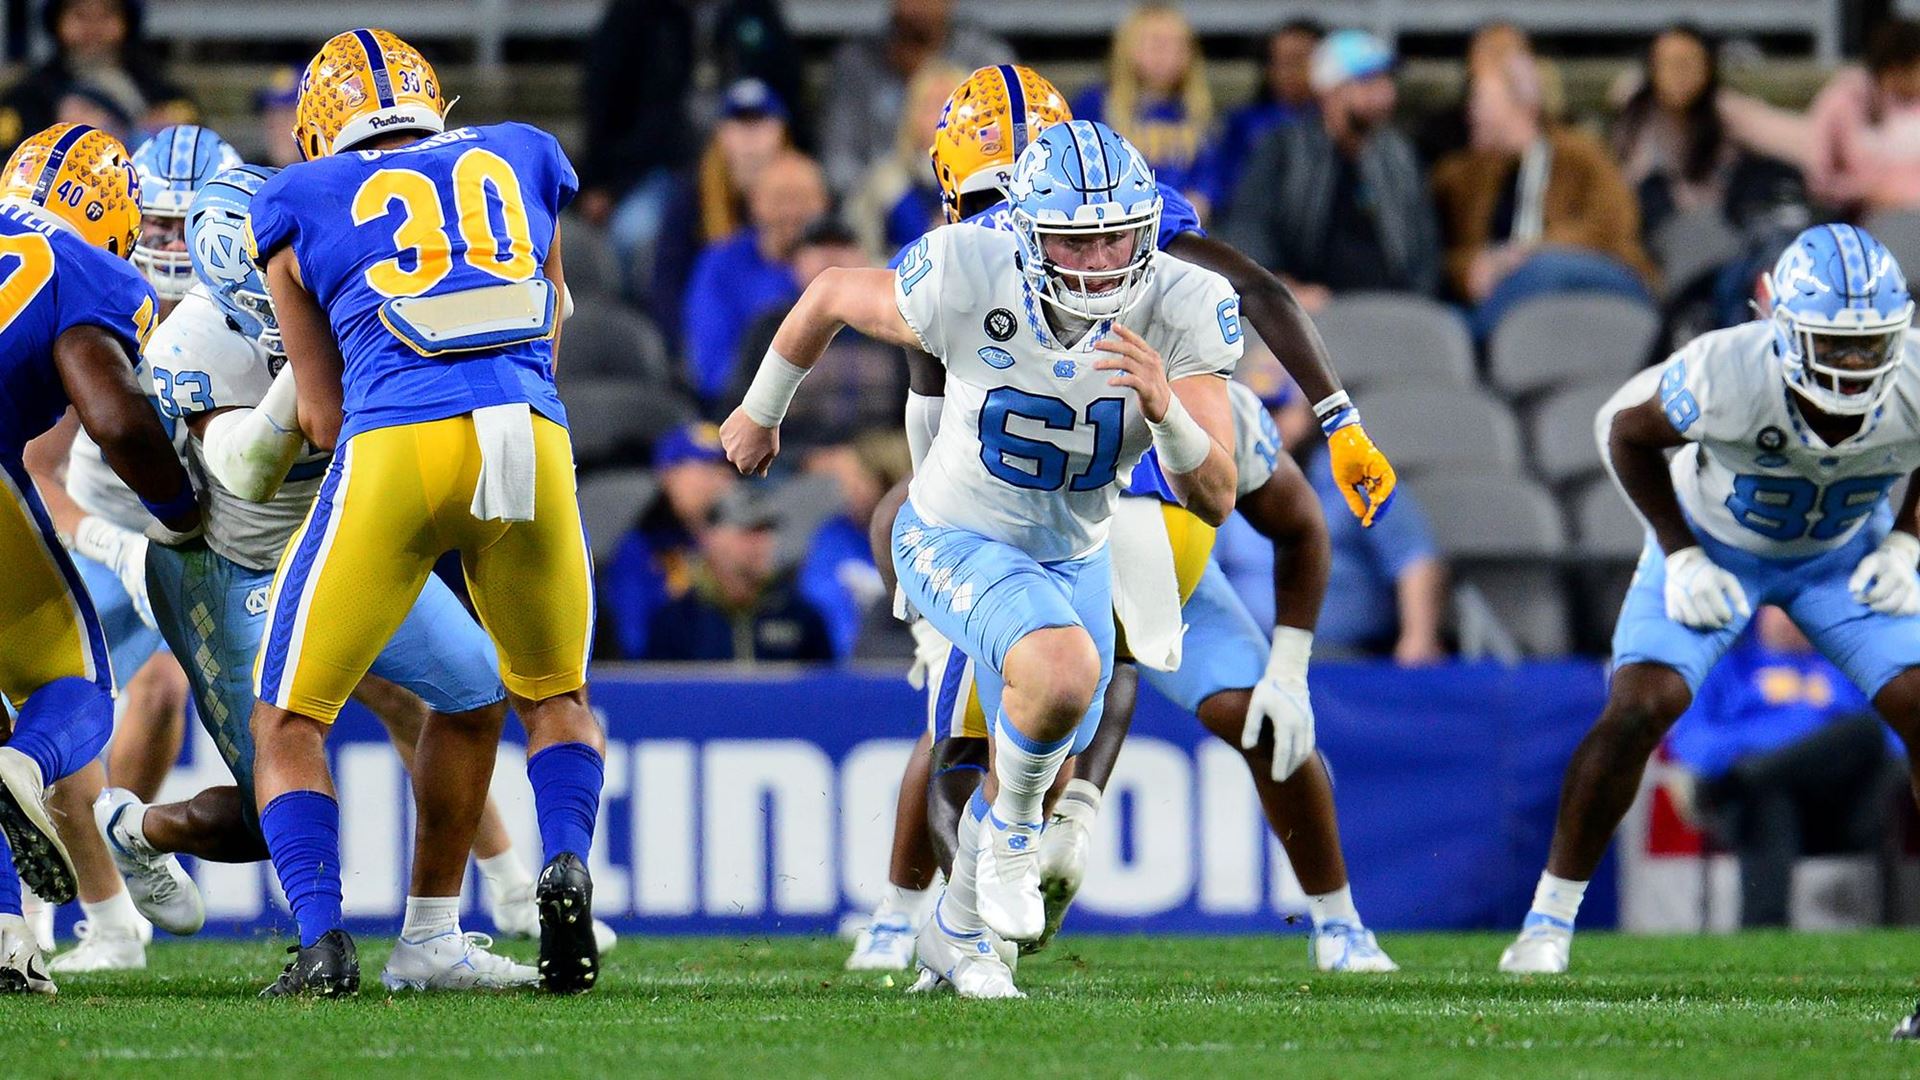 The Man in the Middle: UNC Long Snapper Drew Little